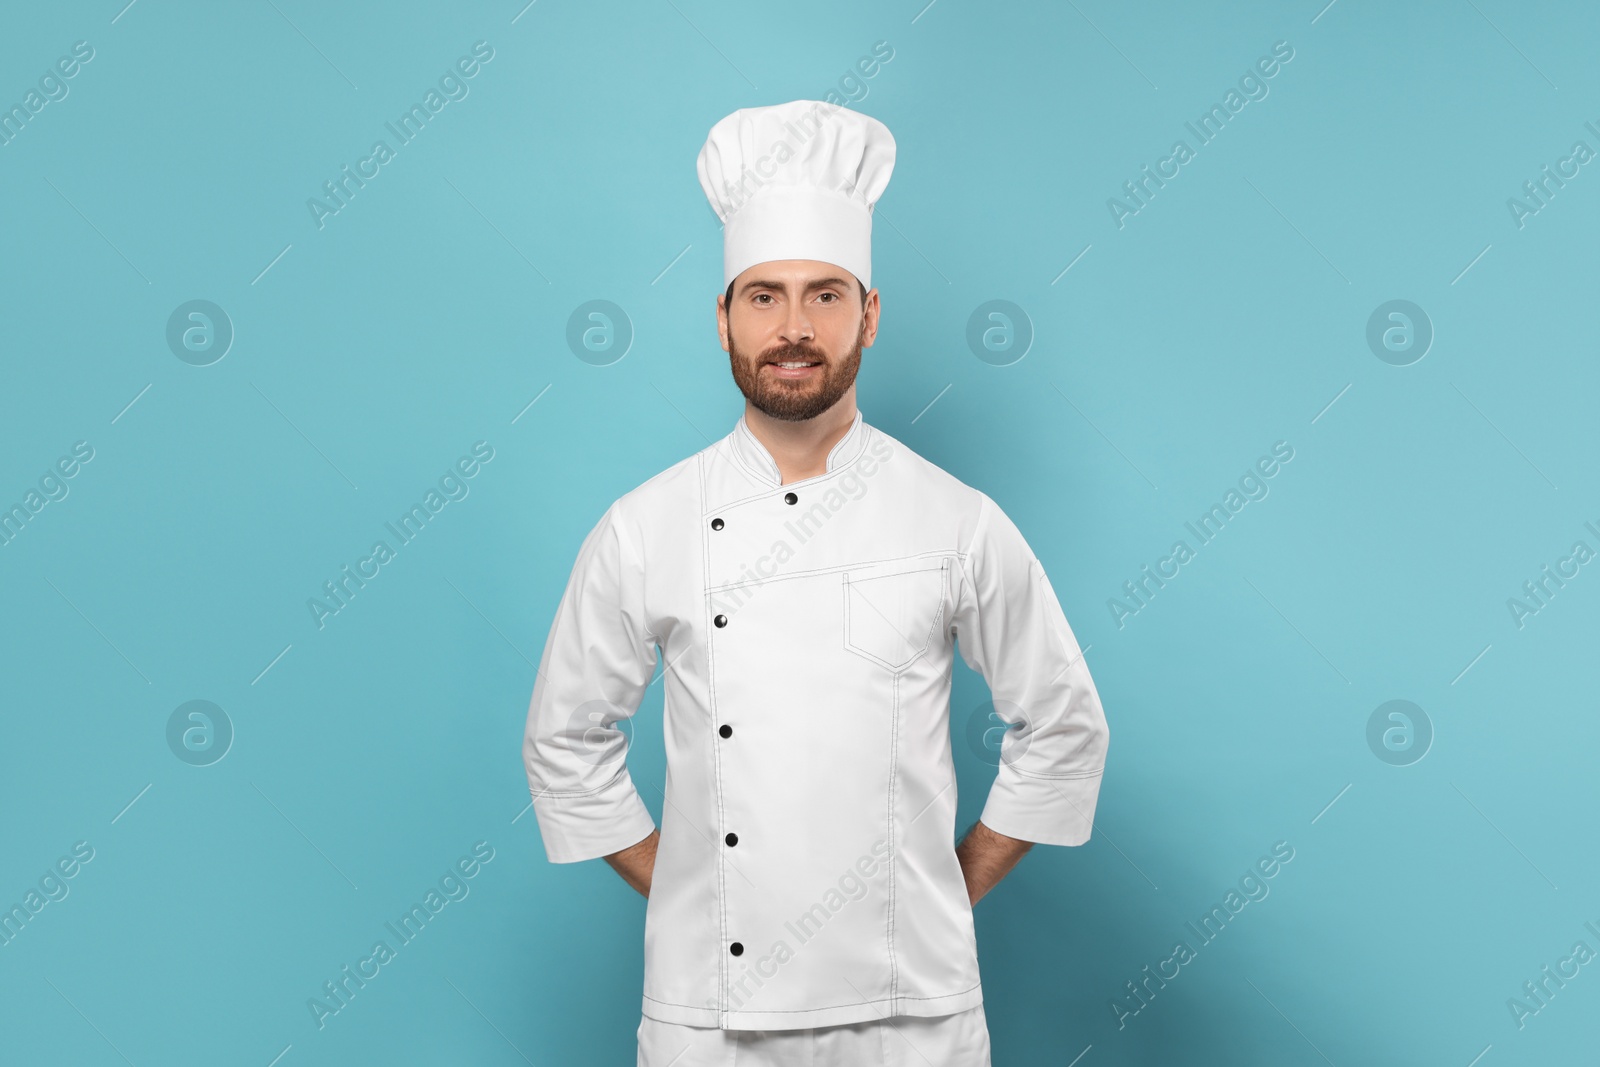 Photo of Smiling mature chef on light blue background